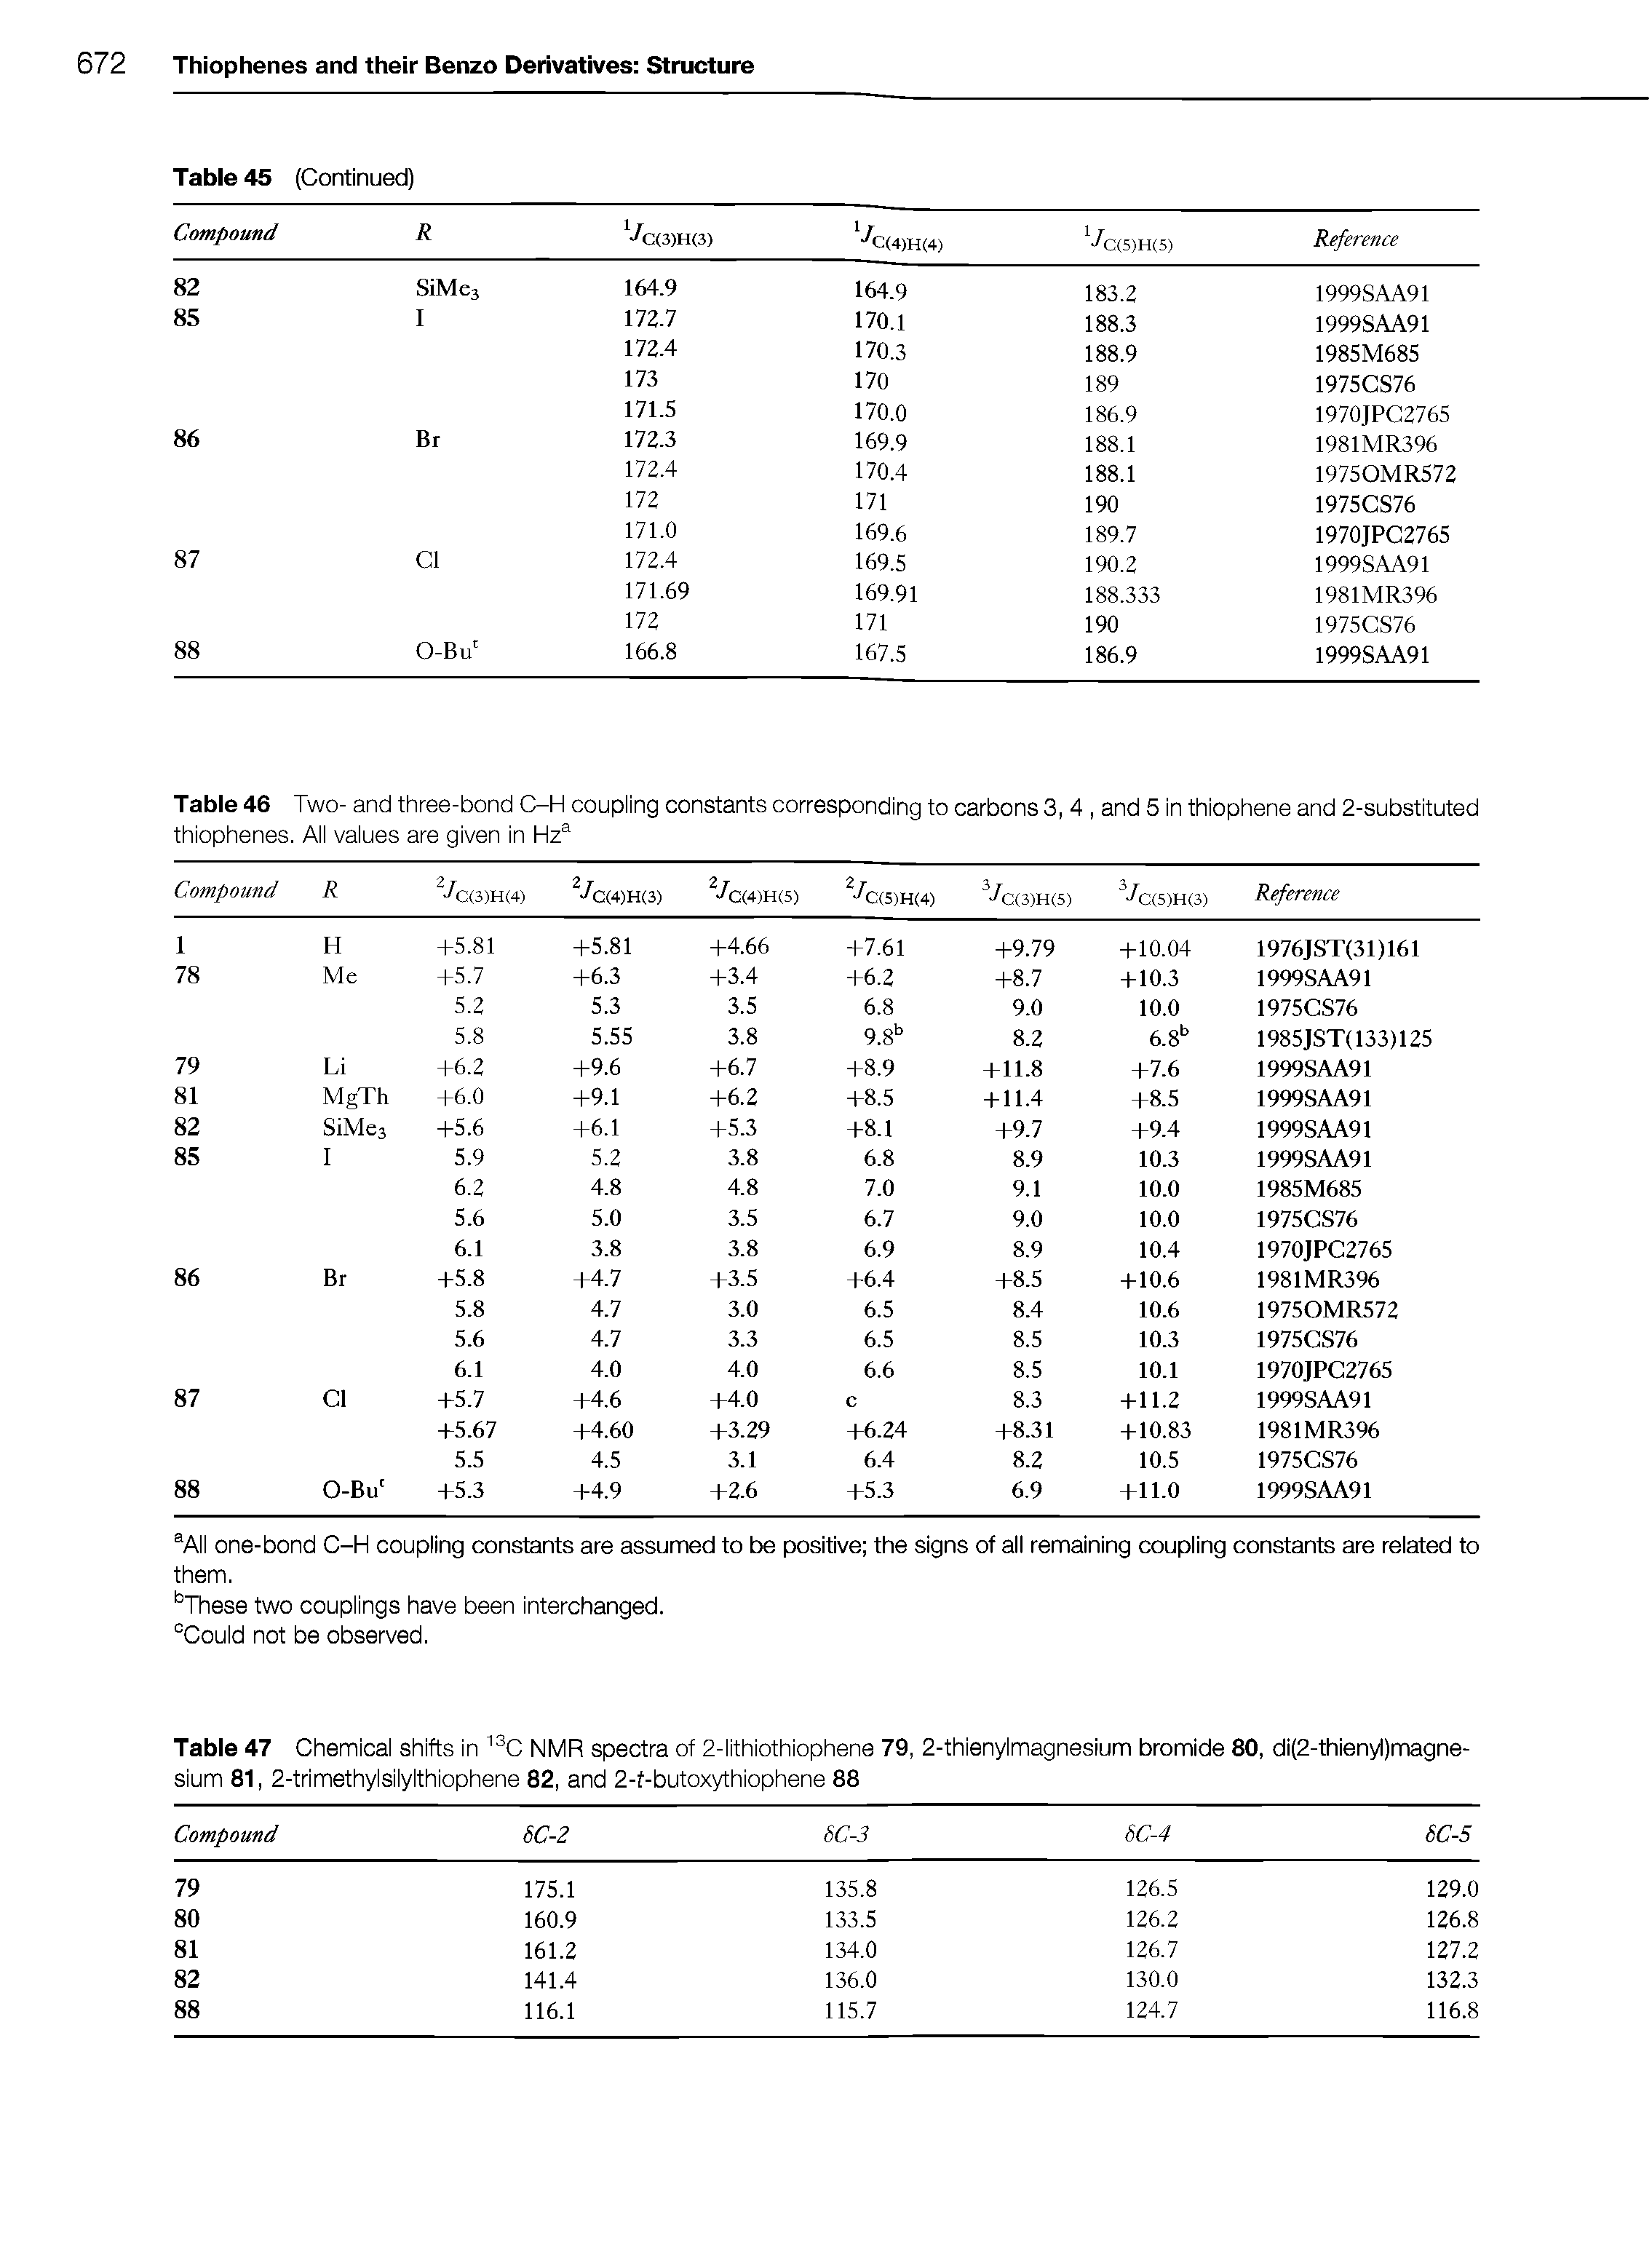 Table 47 Chemioal shifts in NMR speotra of 2-lithiothiophene 79, 2-thienylmagnesium bromide 80, di(2-thienyl)magne-sium 81, 2-trimethylsilylthiophene 82, and 2-f-butoxythiophene 88...